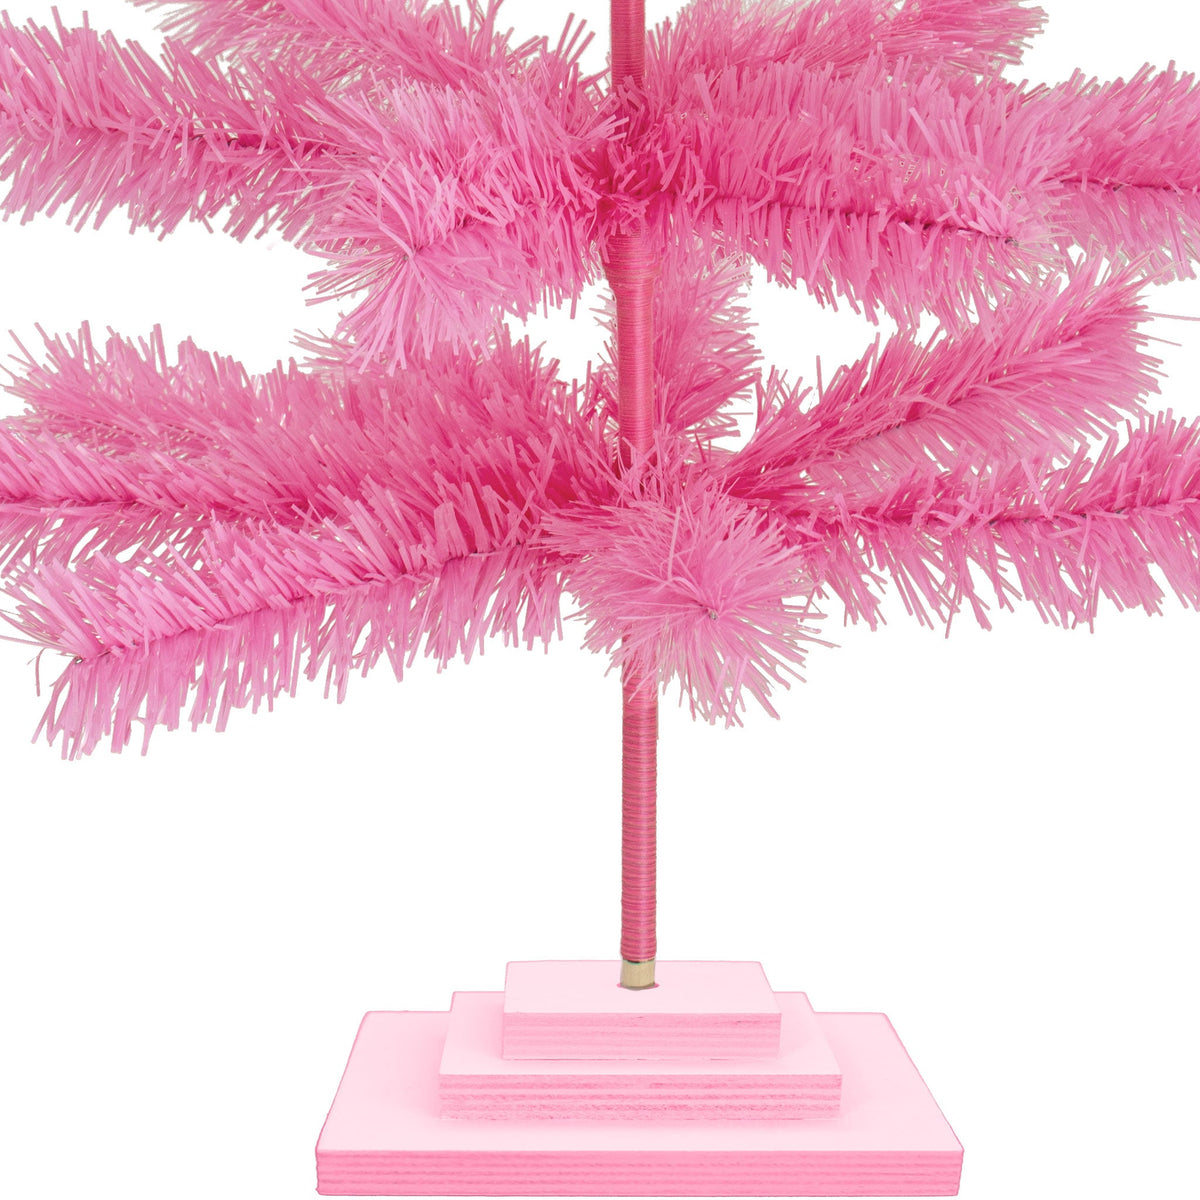 4FT Tall Pink Christmas Trees come with a pink painted wooden triple-tiered base.